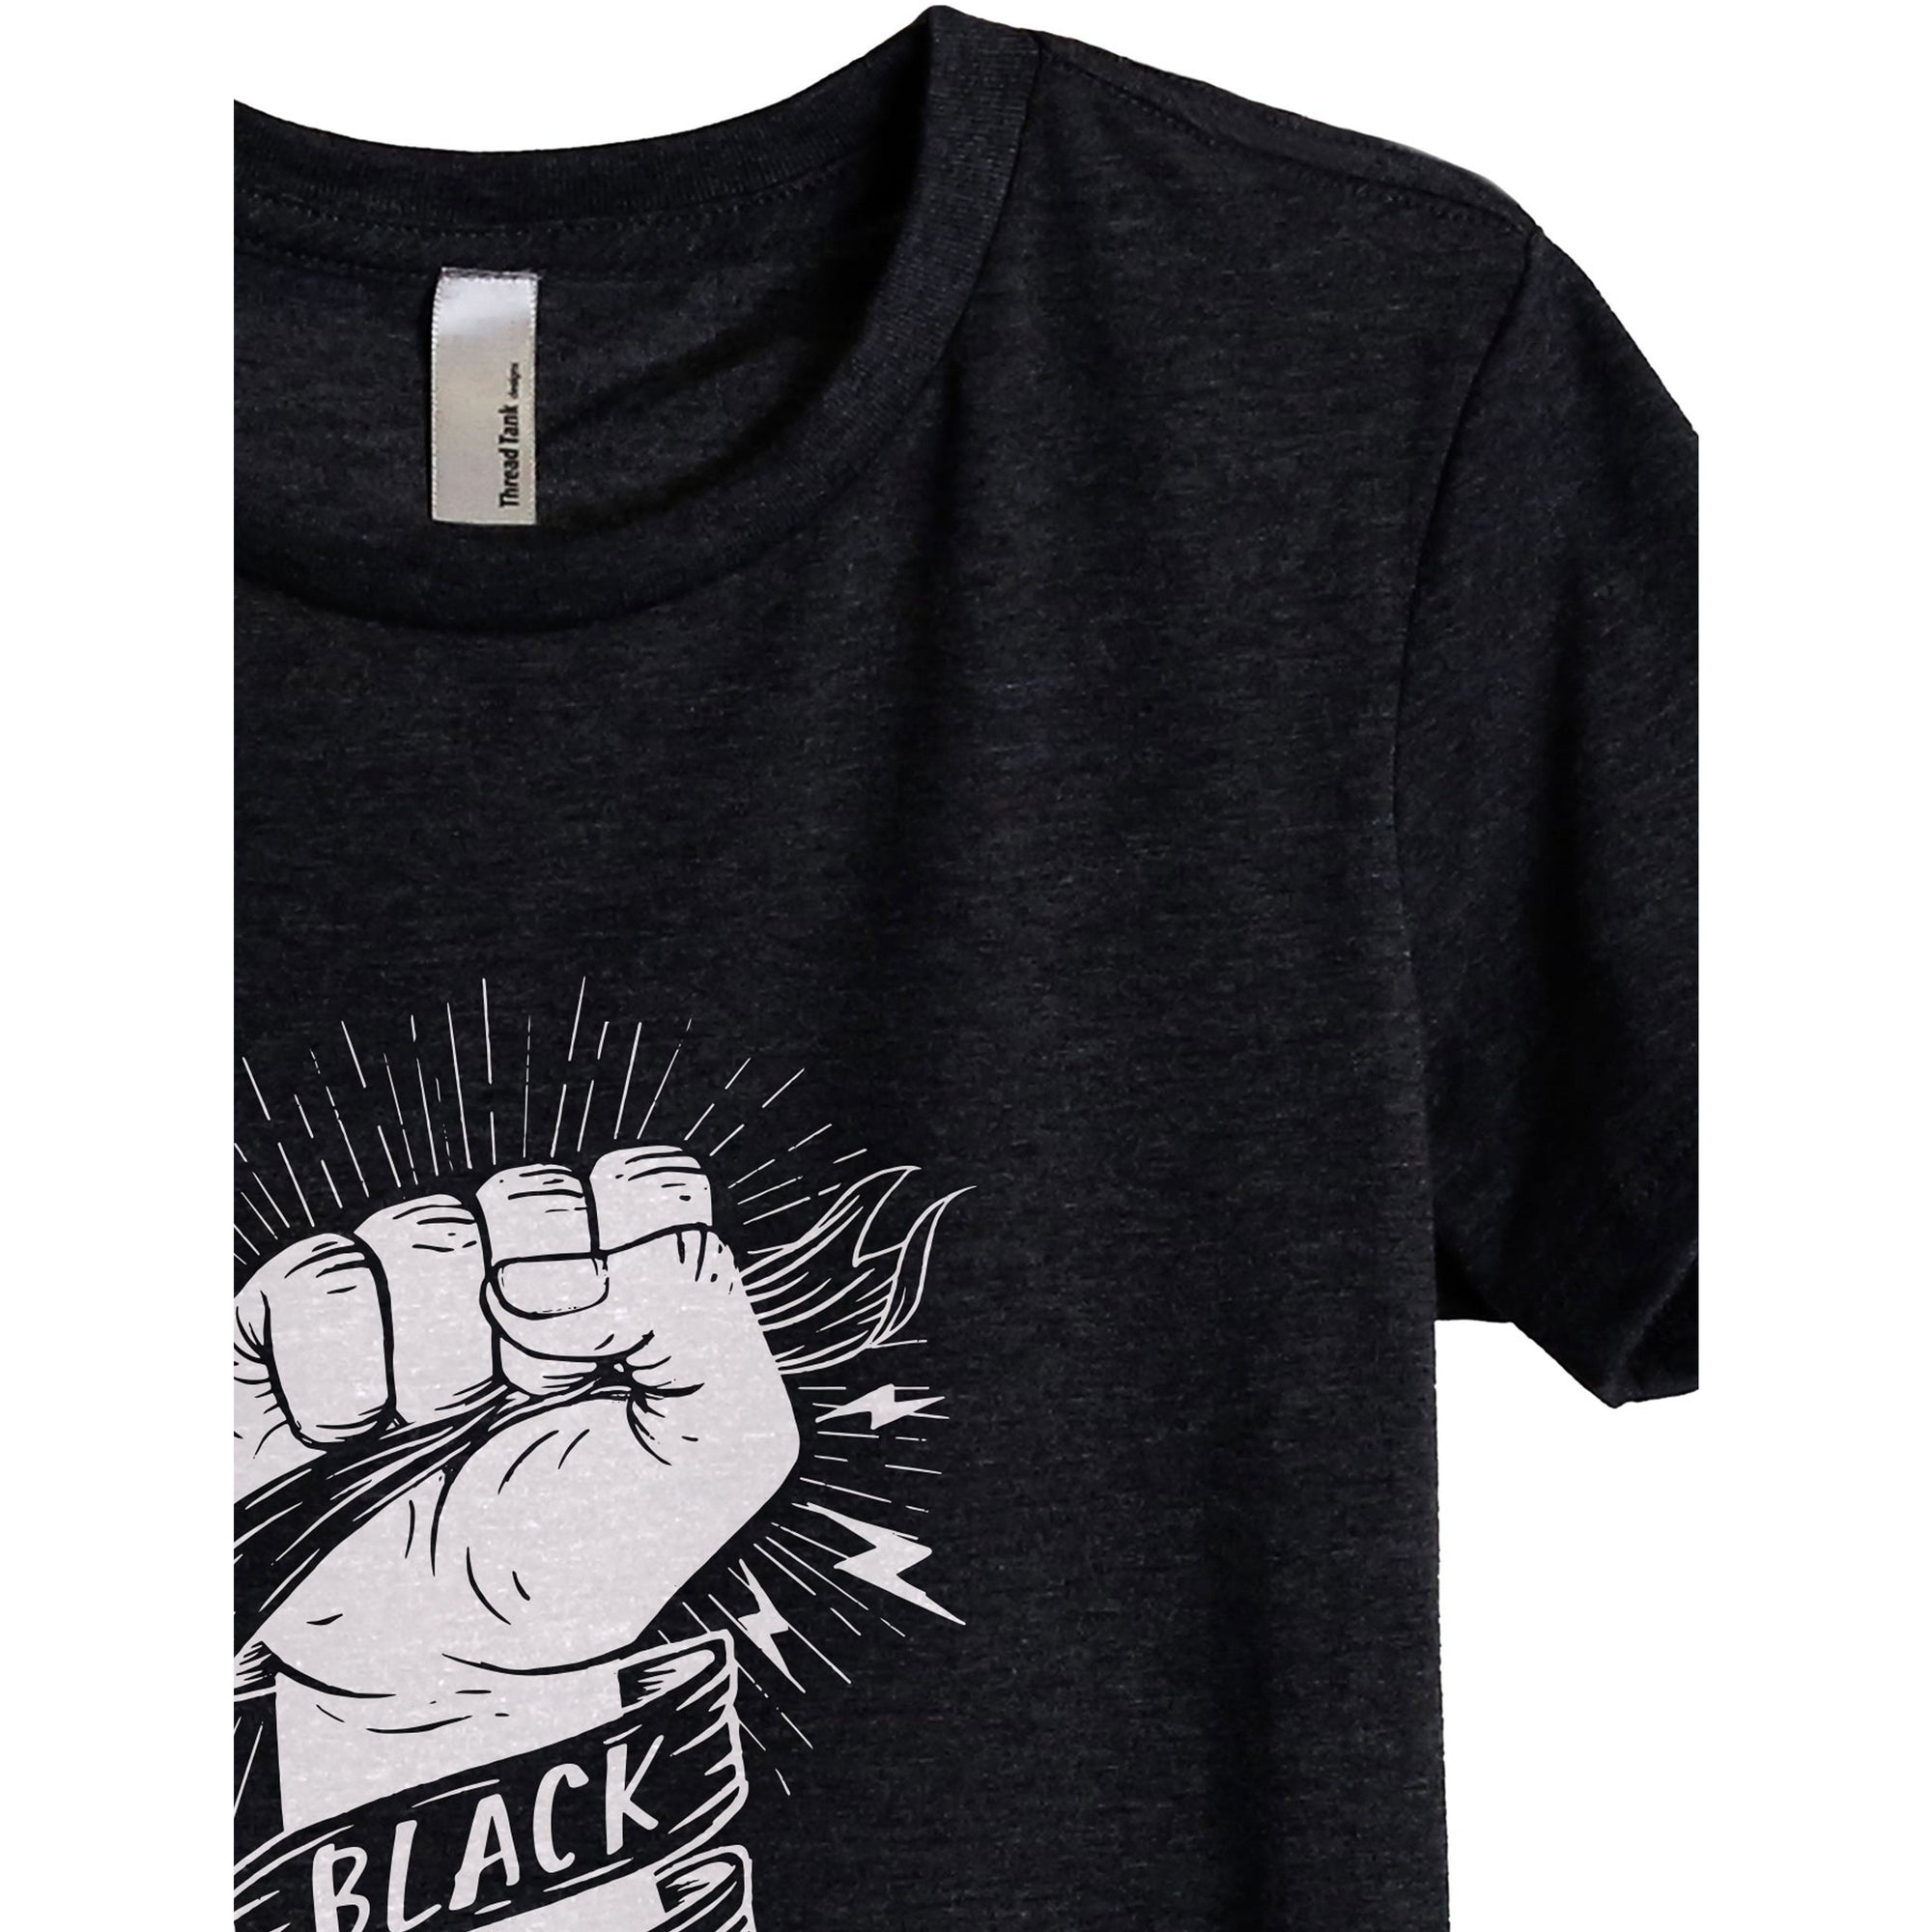 Black Lives Matter Women's Relaxed Crewneck T-Shirt Top Tee Charcoal Grey Zoom Details